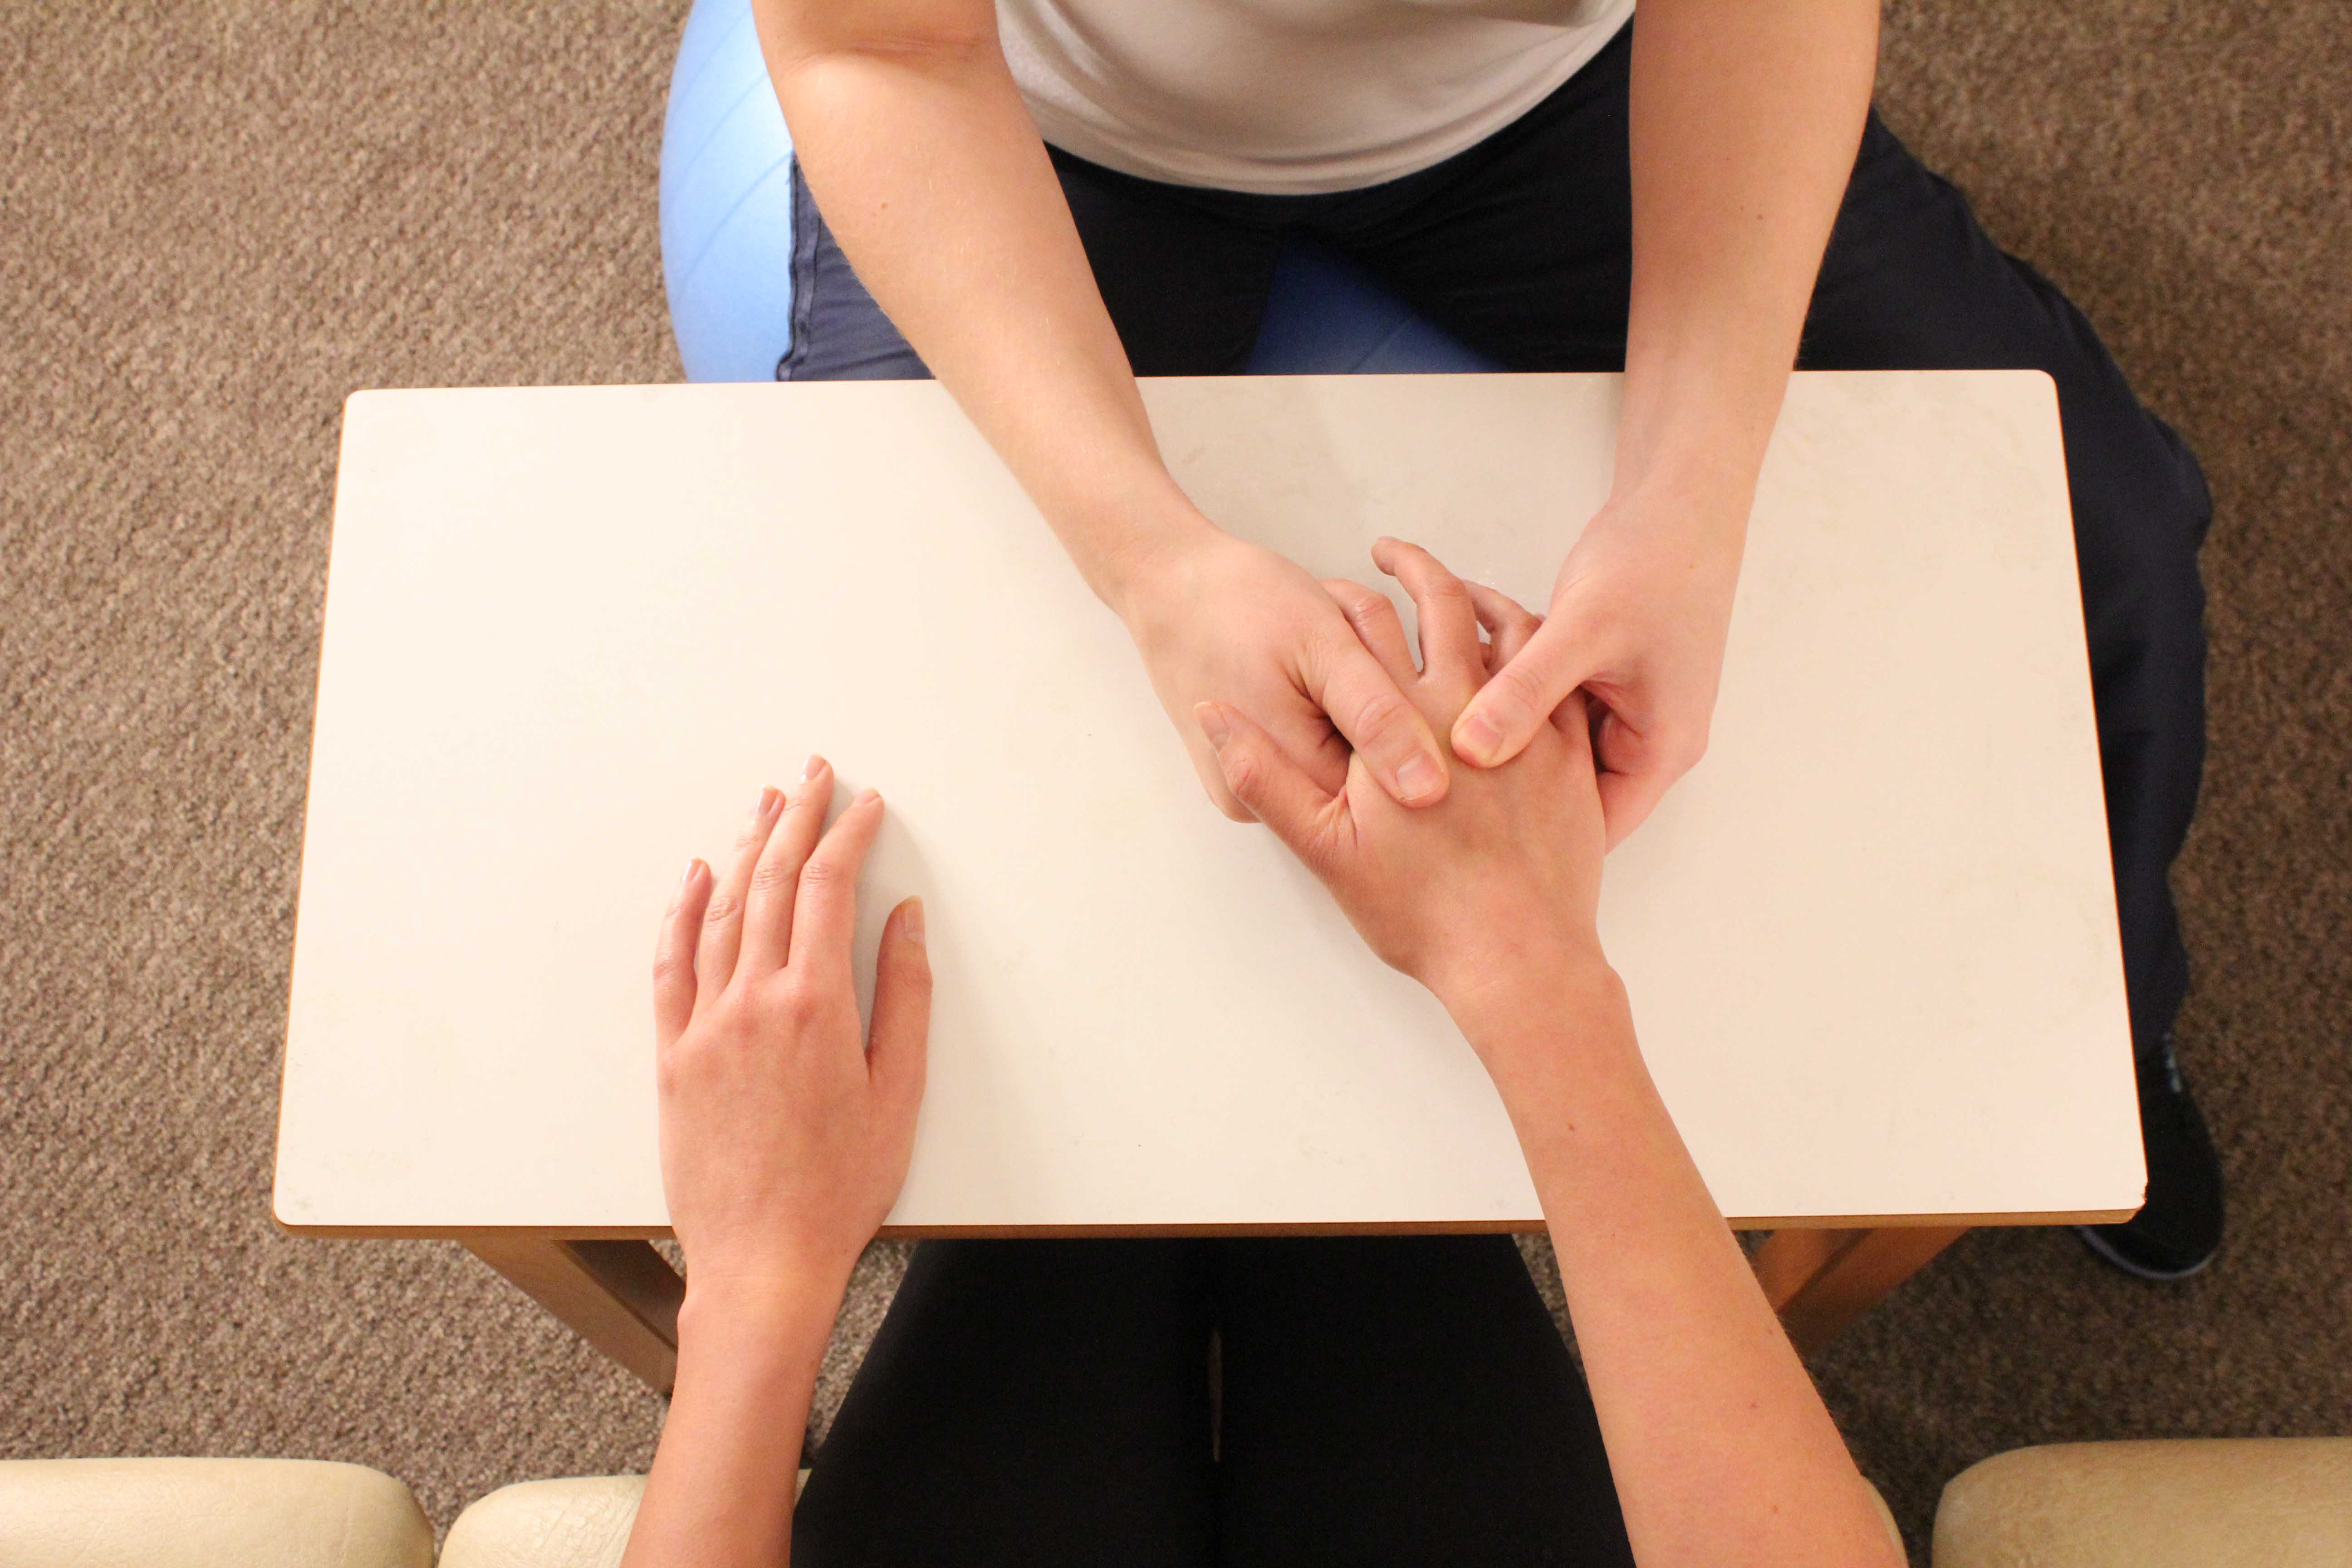 Therapist soft tissue massage of the metacarpals and connective tissues in the hand